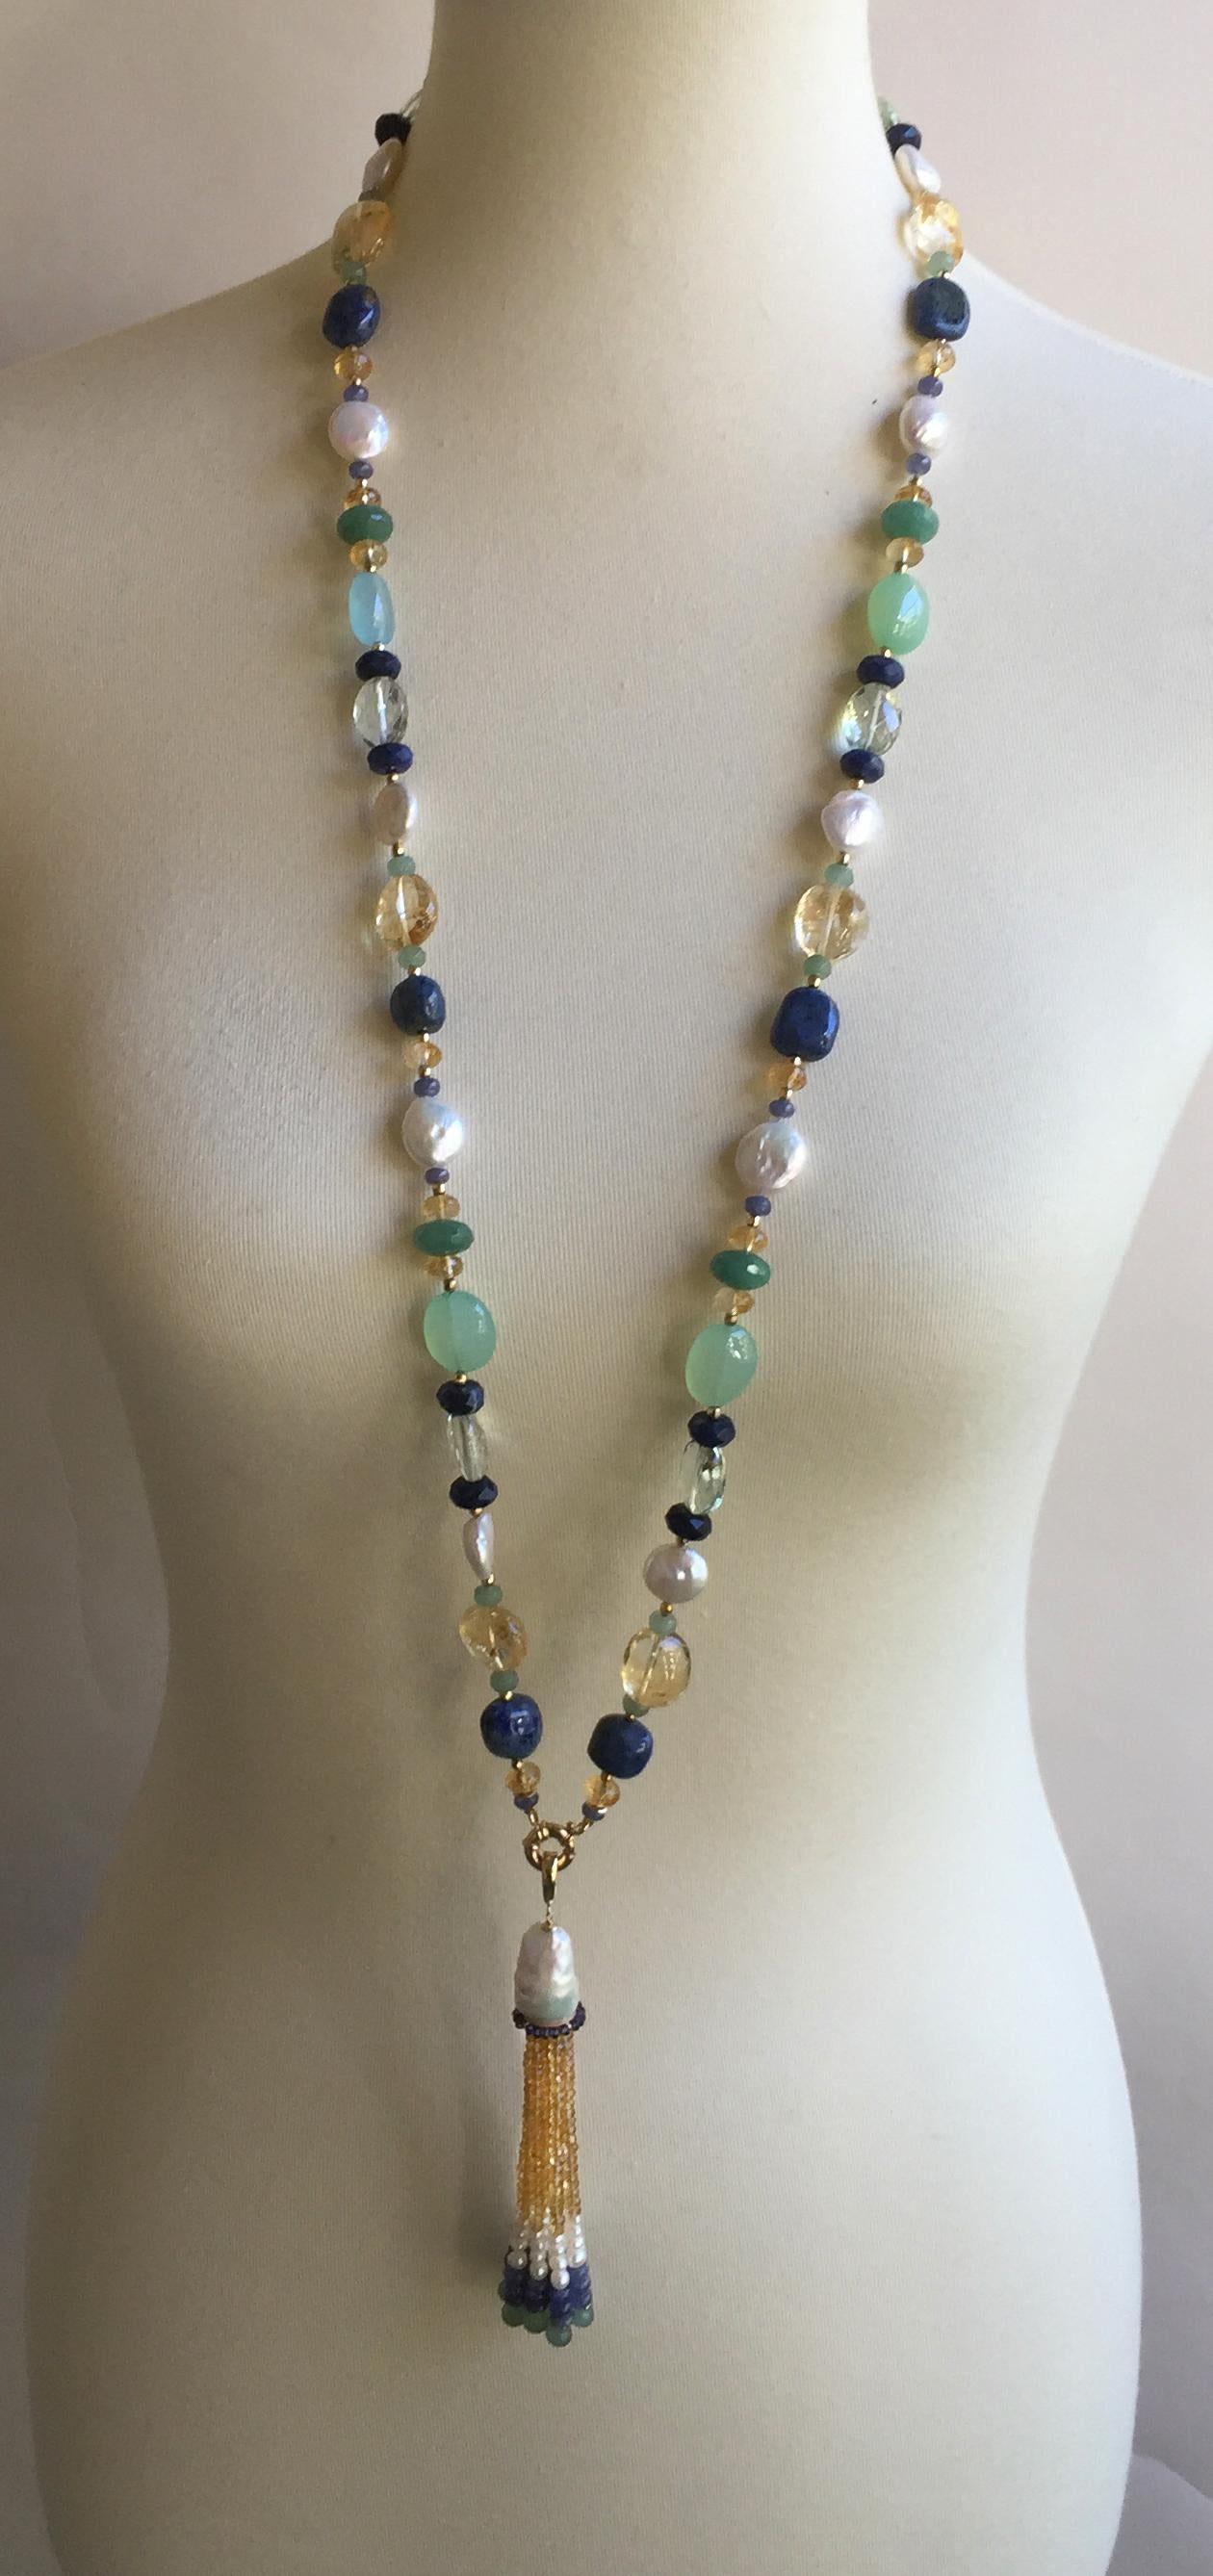 Women's White Pearl and Multi-Color Stone Necklace and Tassel with 14 Karat Gold Clasp